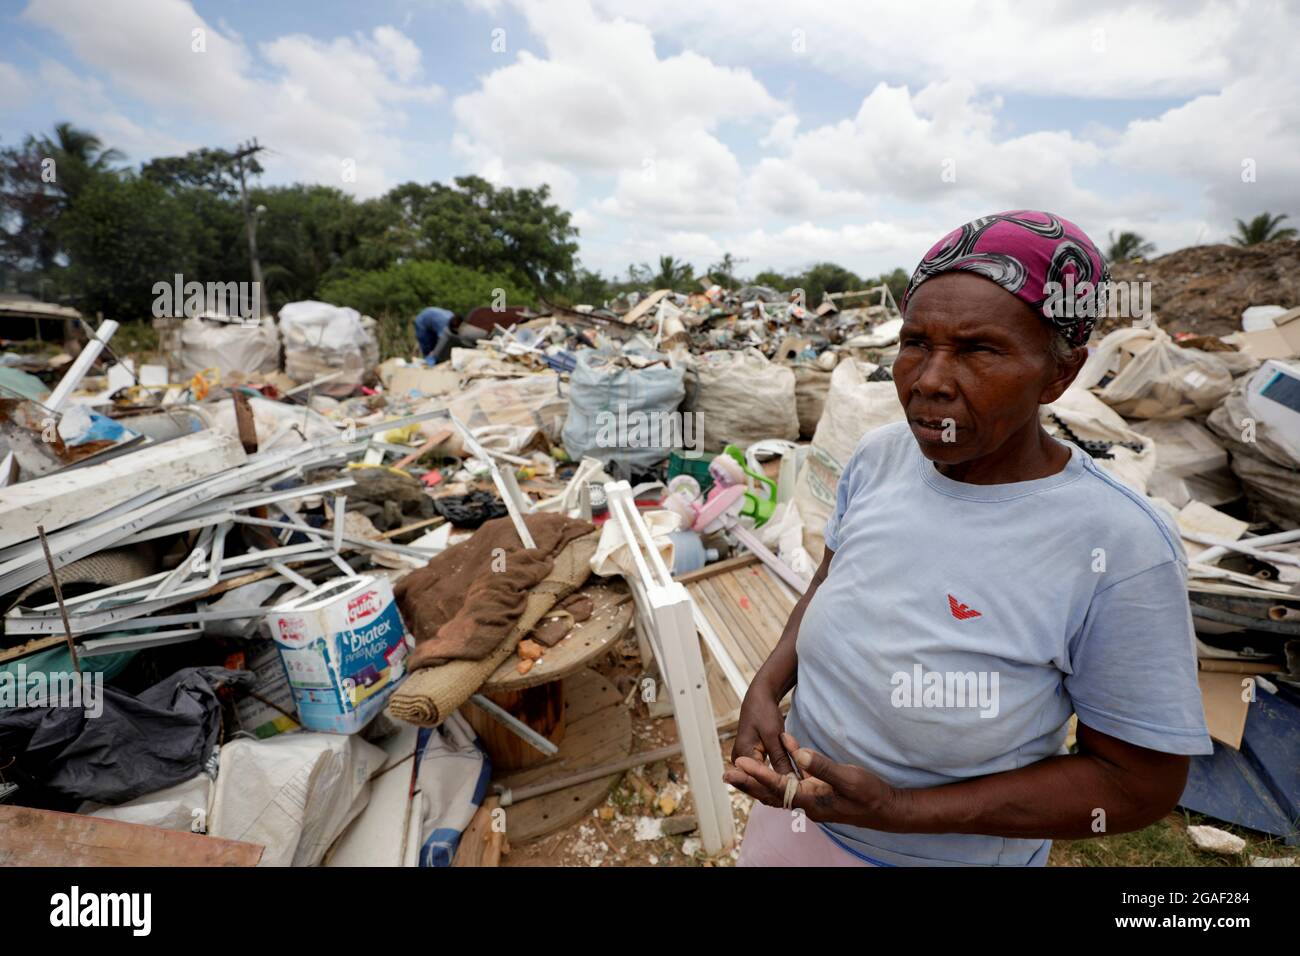 lauro de freitas, bahia, brazil - march 14, 2019: elderly woman collecting material for recycling at a landfill in the city of Lauro de Freitas. Stock Photo